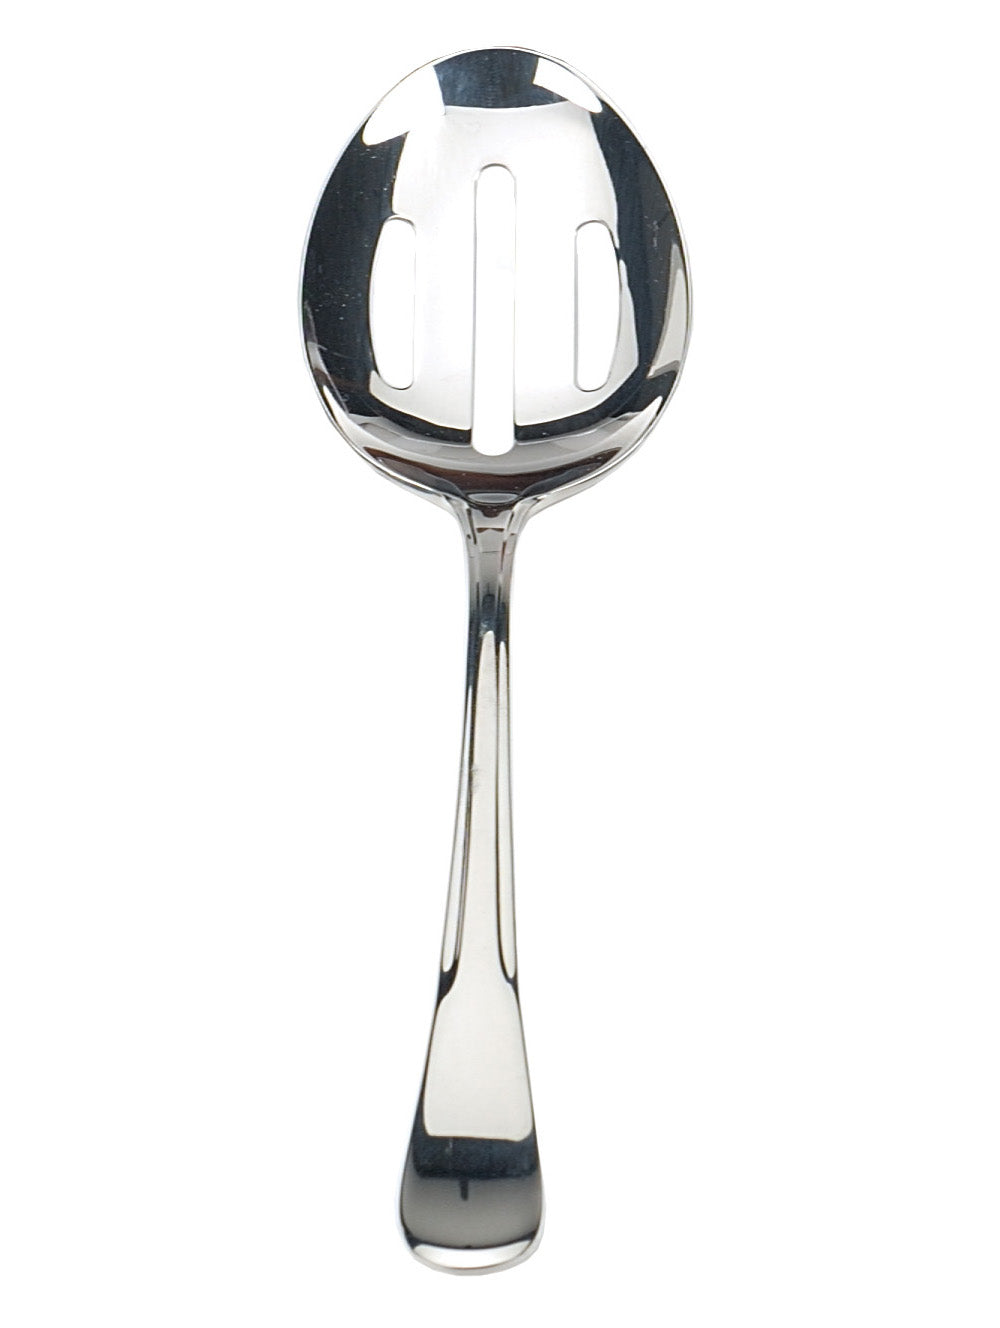 stainless steel Slotted Serving Spoon on white background.